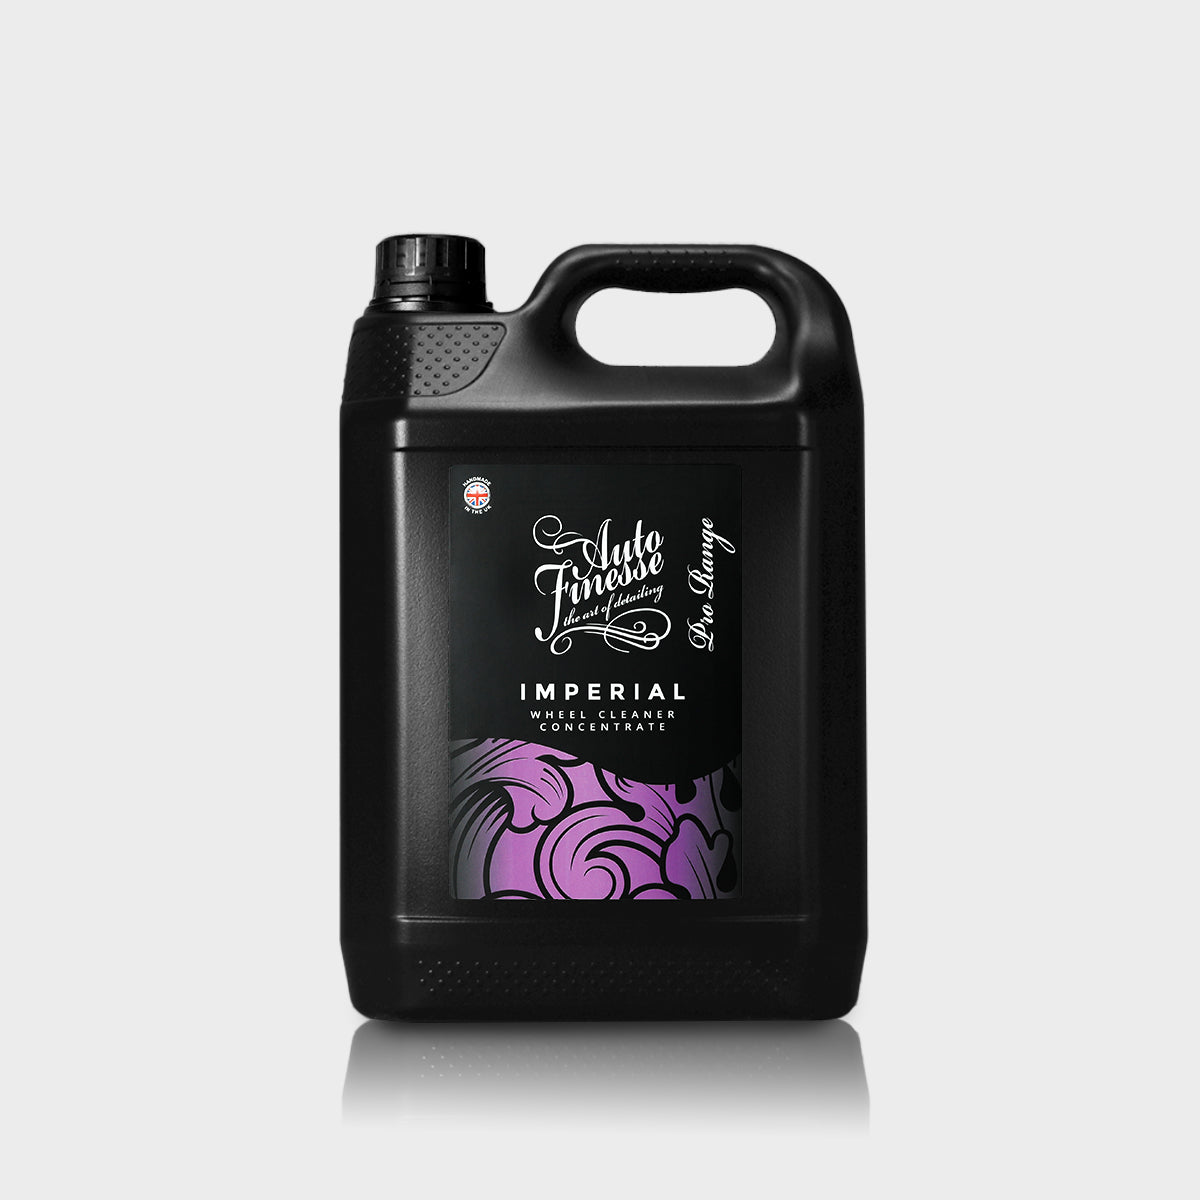 Imperial Wheel Cleaner 5 Litre